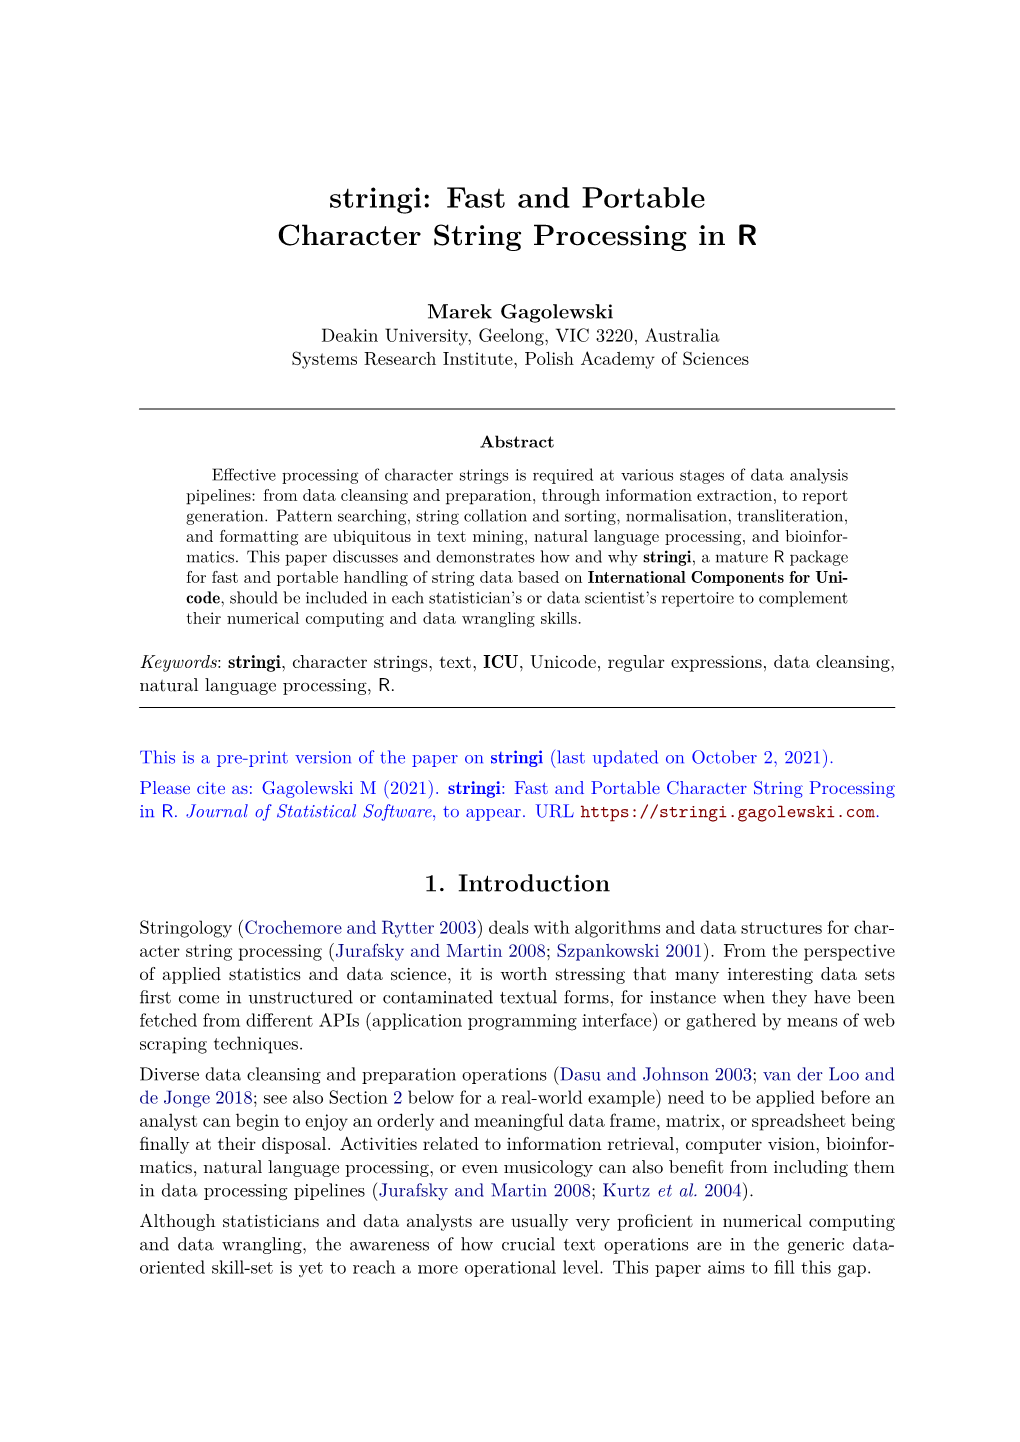 Fast and Portable Character String Processing in R